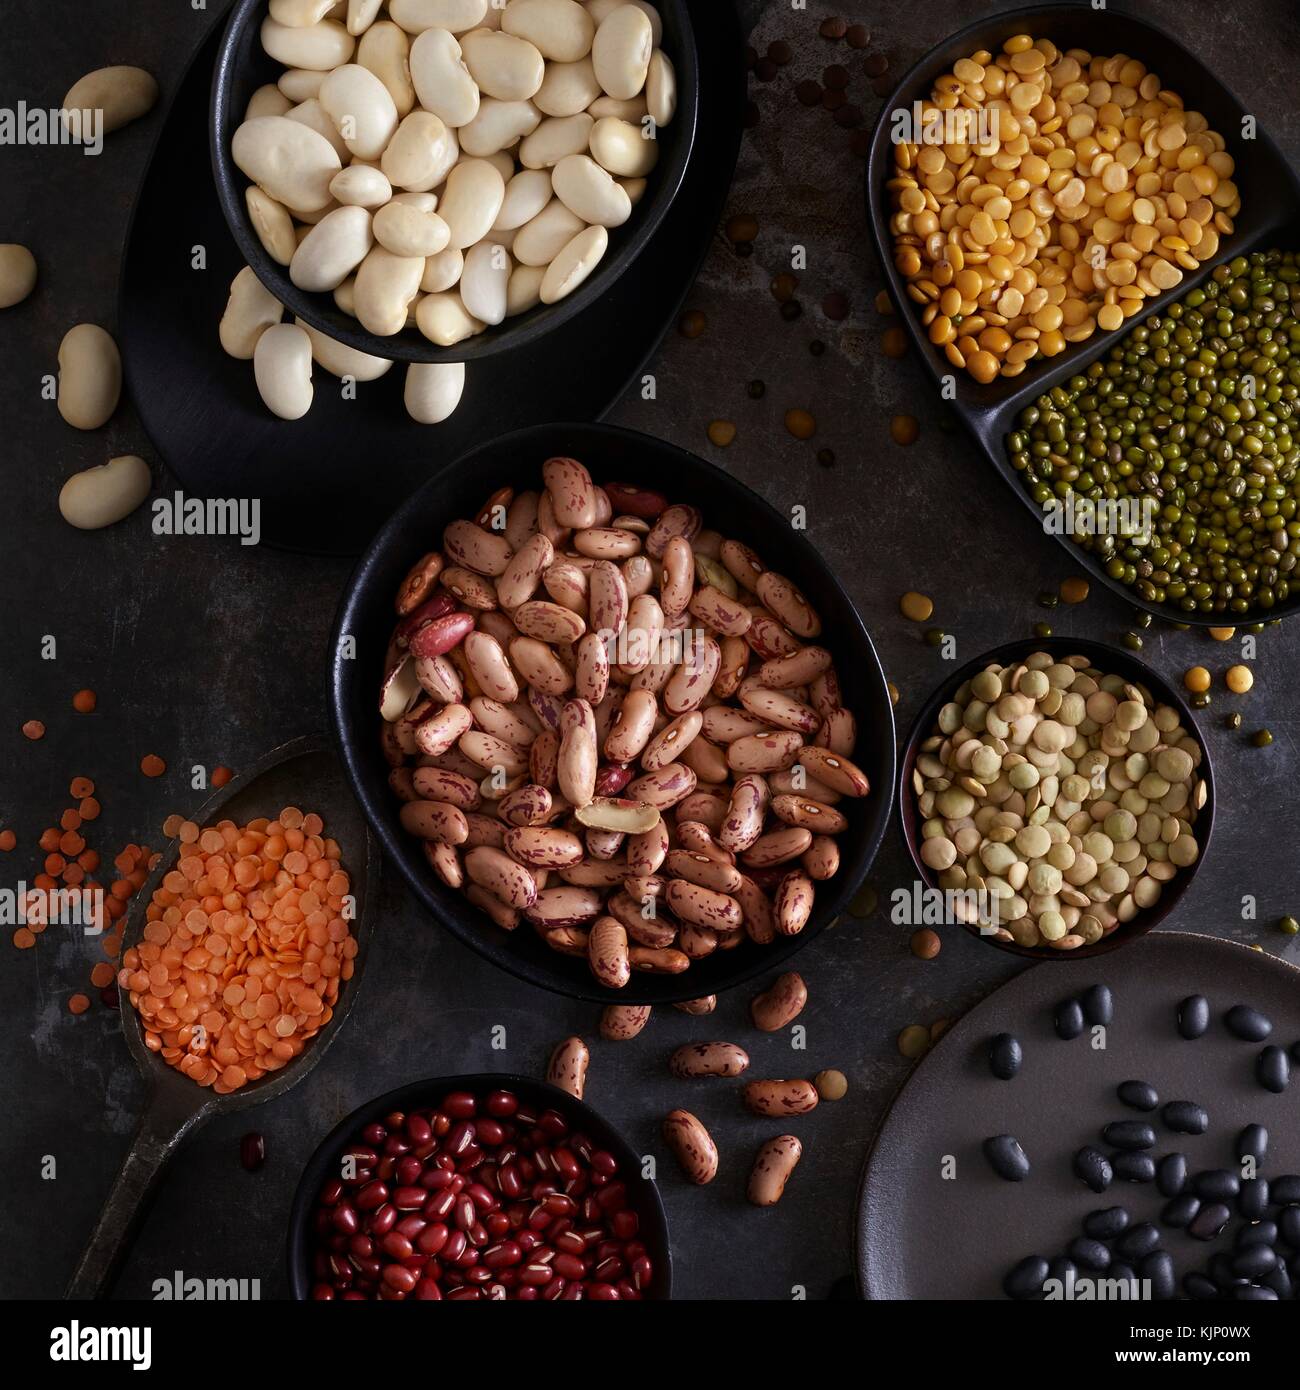 Pulses in bowls against dark background, overhead view. Stock Photo